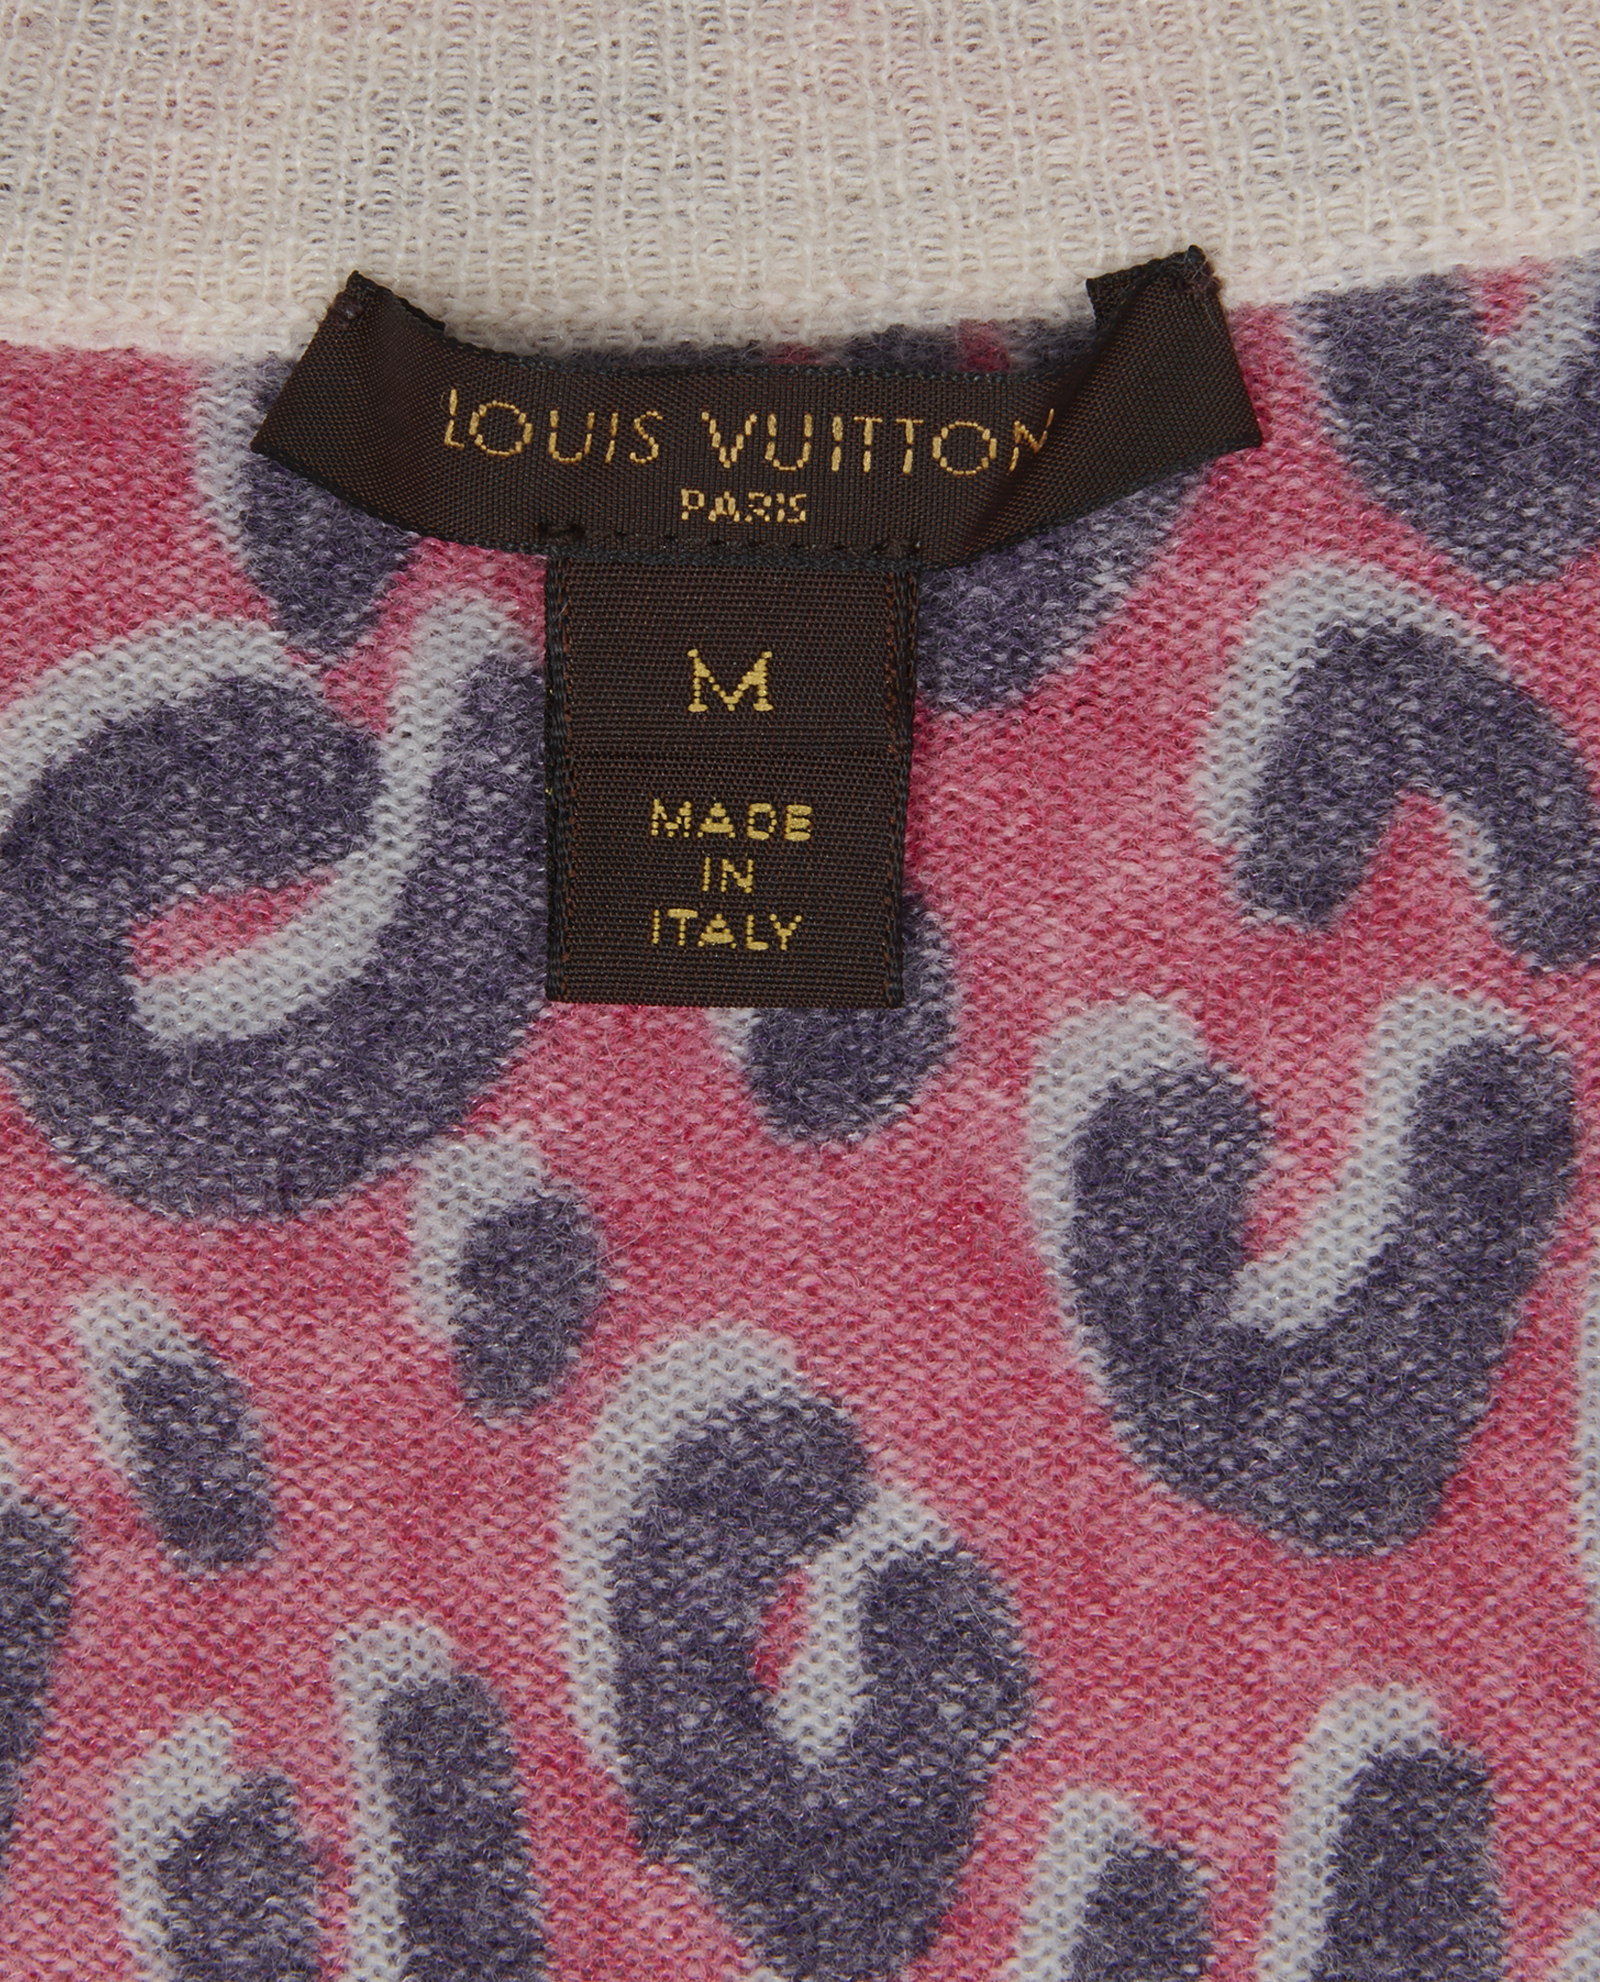 Louis Vuitton Pre-owned Stephen Sprouse Leopard Jumper - Pink